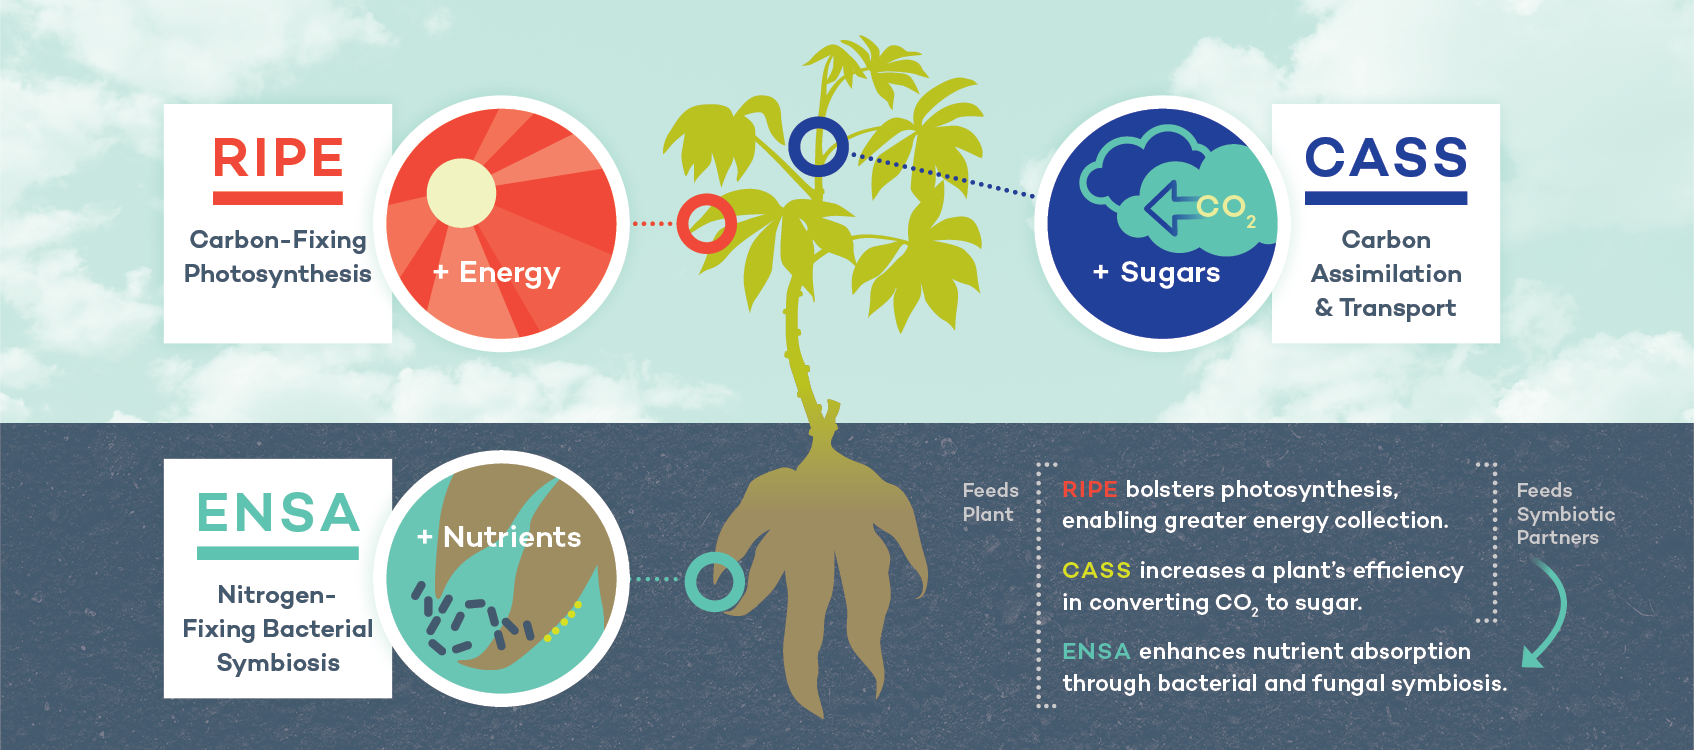 Diagram of a cassava plant showing technologies from RIPE (carbon-fixing photosynthesis), ENSA (nitrogen-fixing bacterial and fungal symbiosis), and CASS (carbon assimilation and transport) working together.